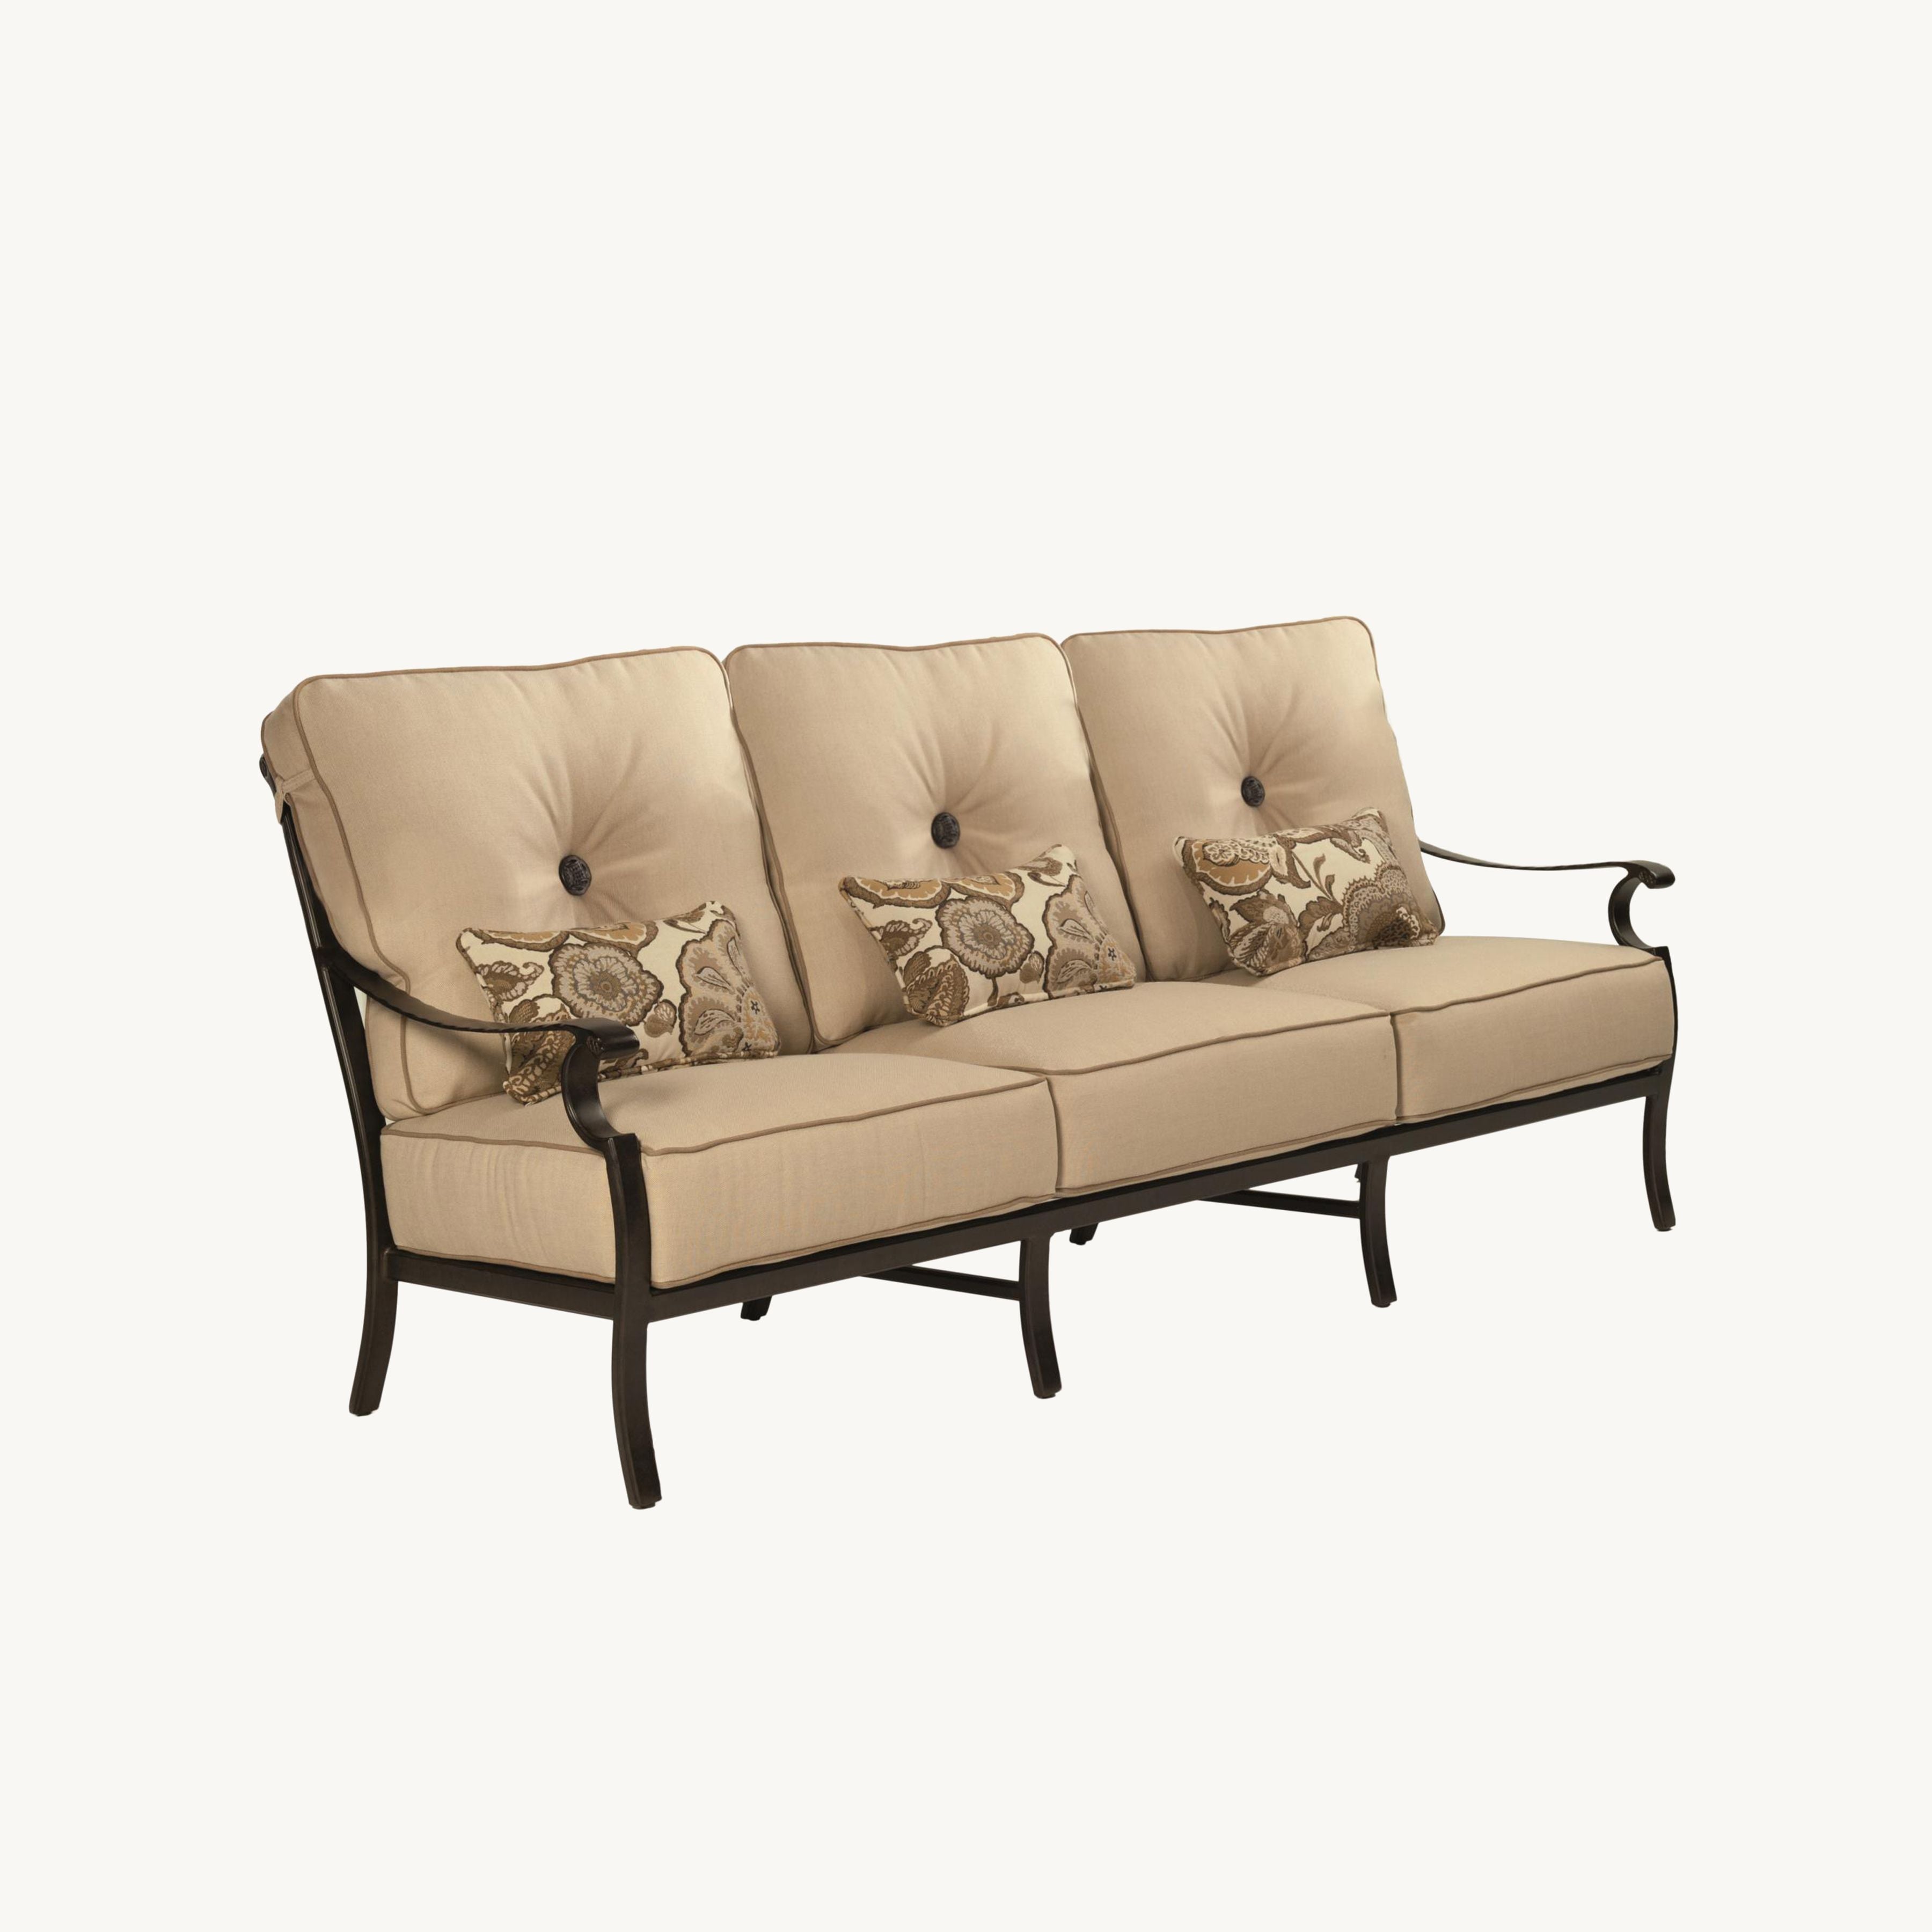 Monterey High Back Cushioned Sofa By Castelle